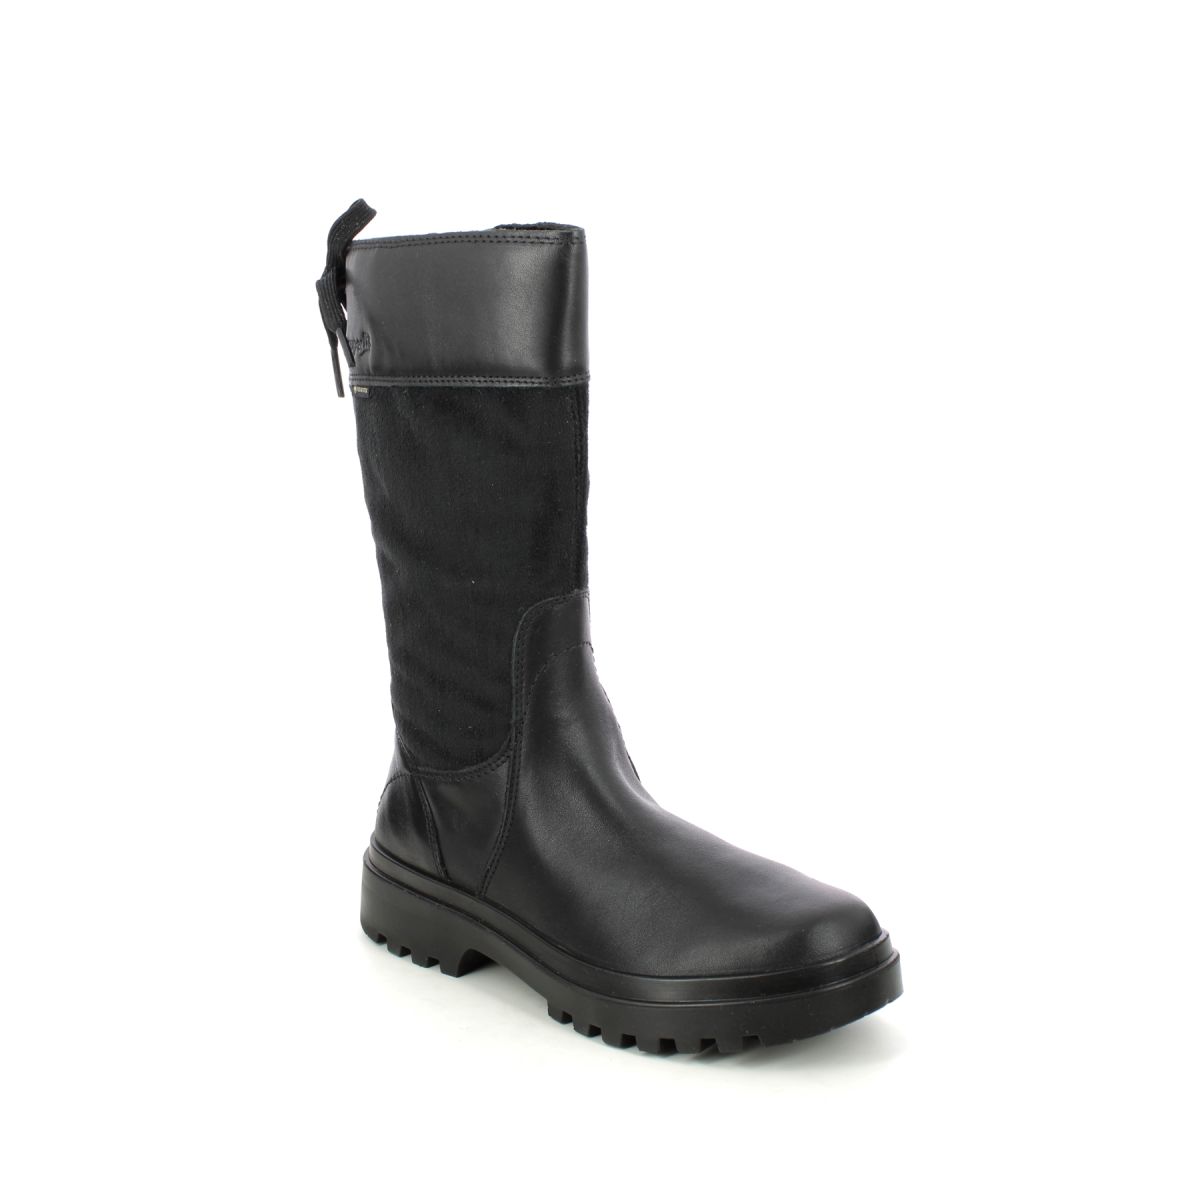 Superfit Abby Long Gtx Black Leather Kids Girls Boots 1000605-0000 In Size 35 In Plain Black Leather For kids